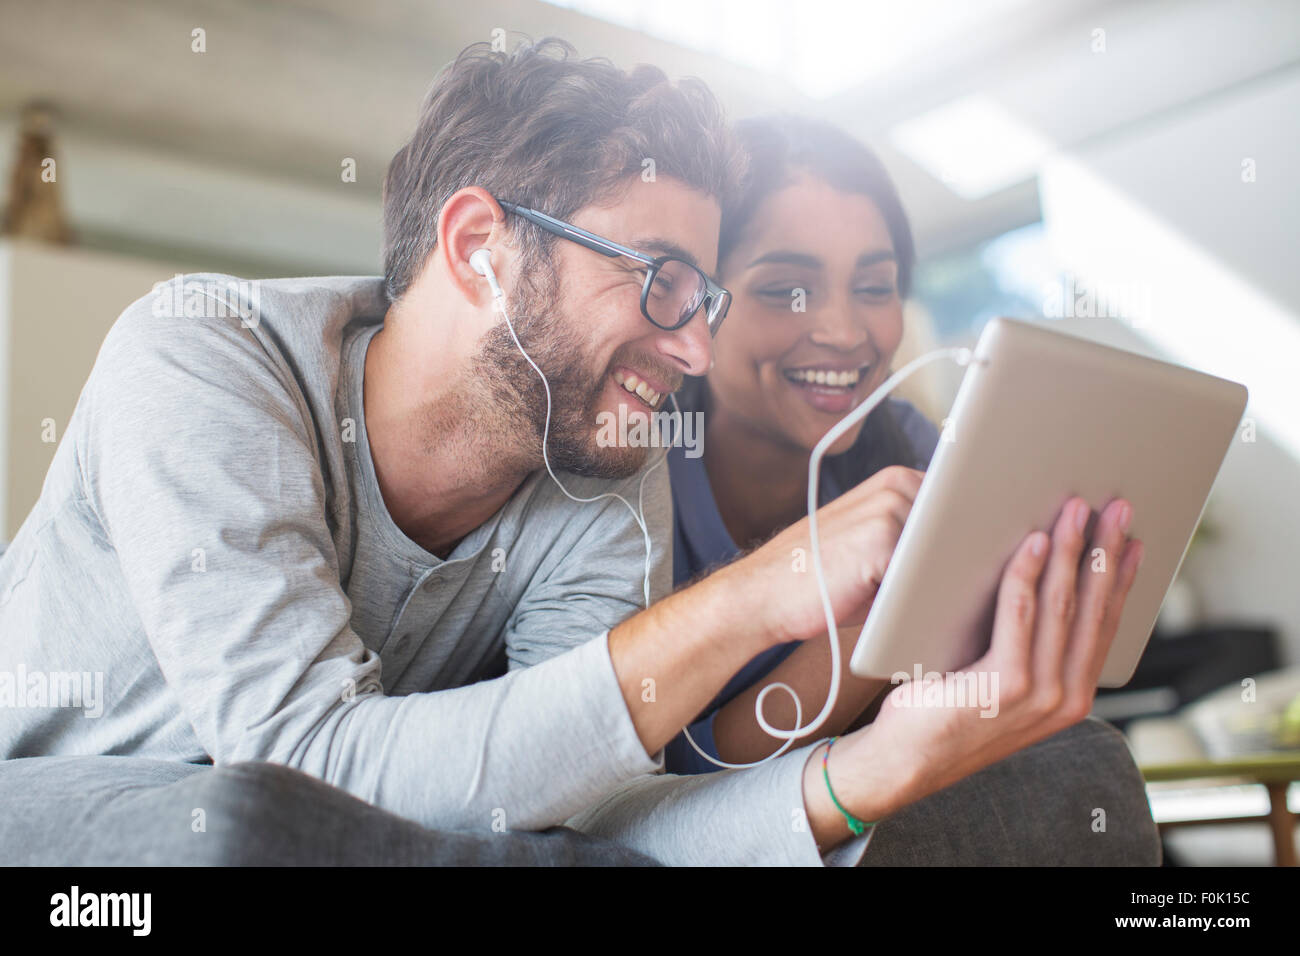 Smiling couple with headphones using digital tablet Stock Photo